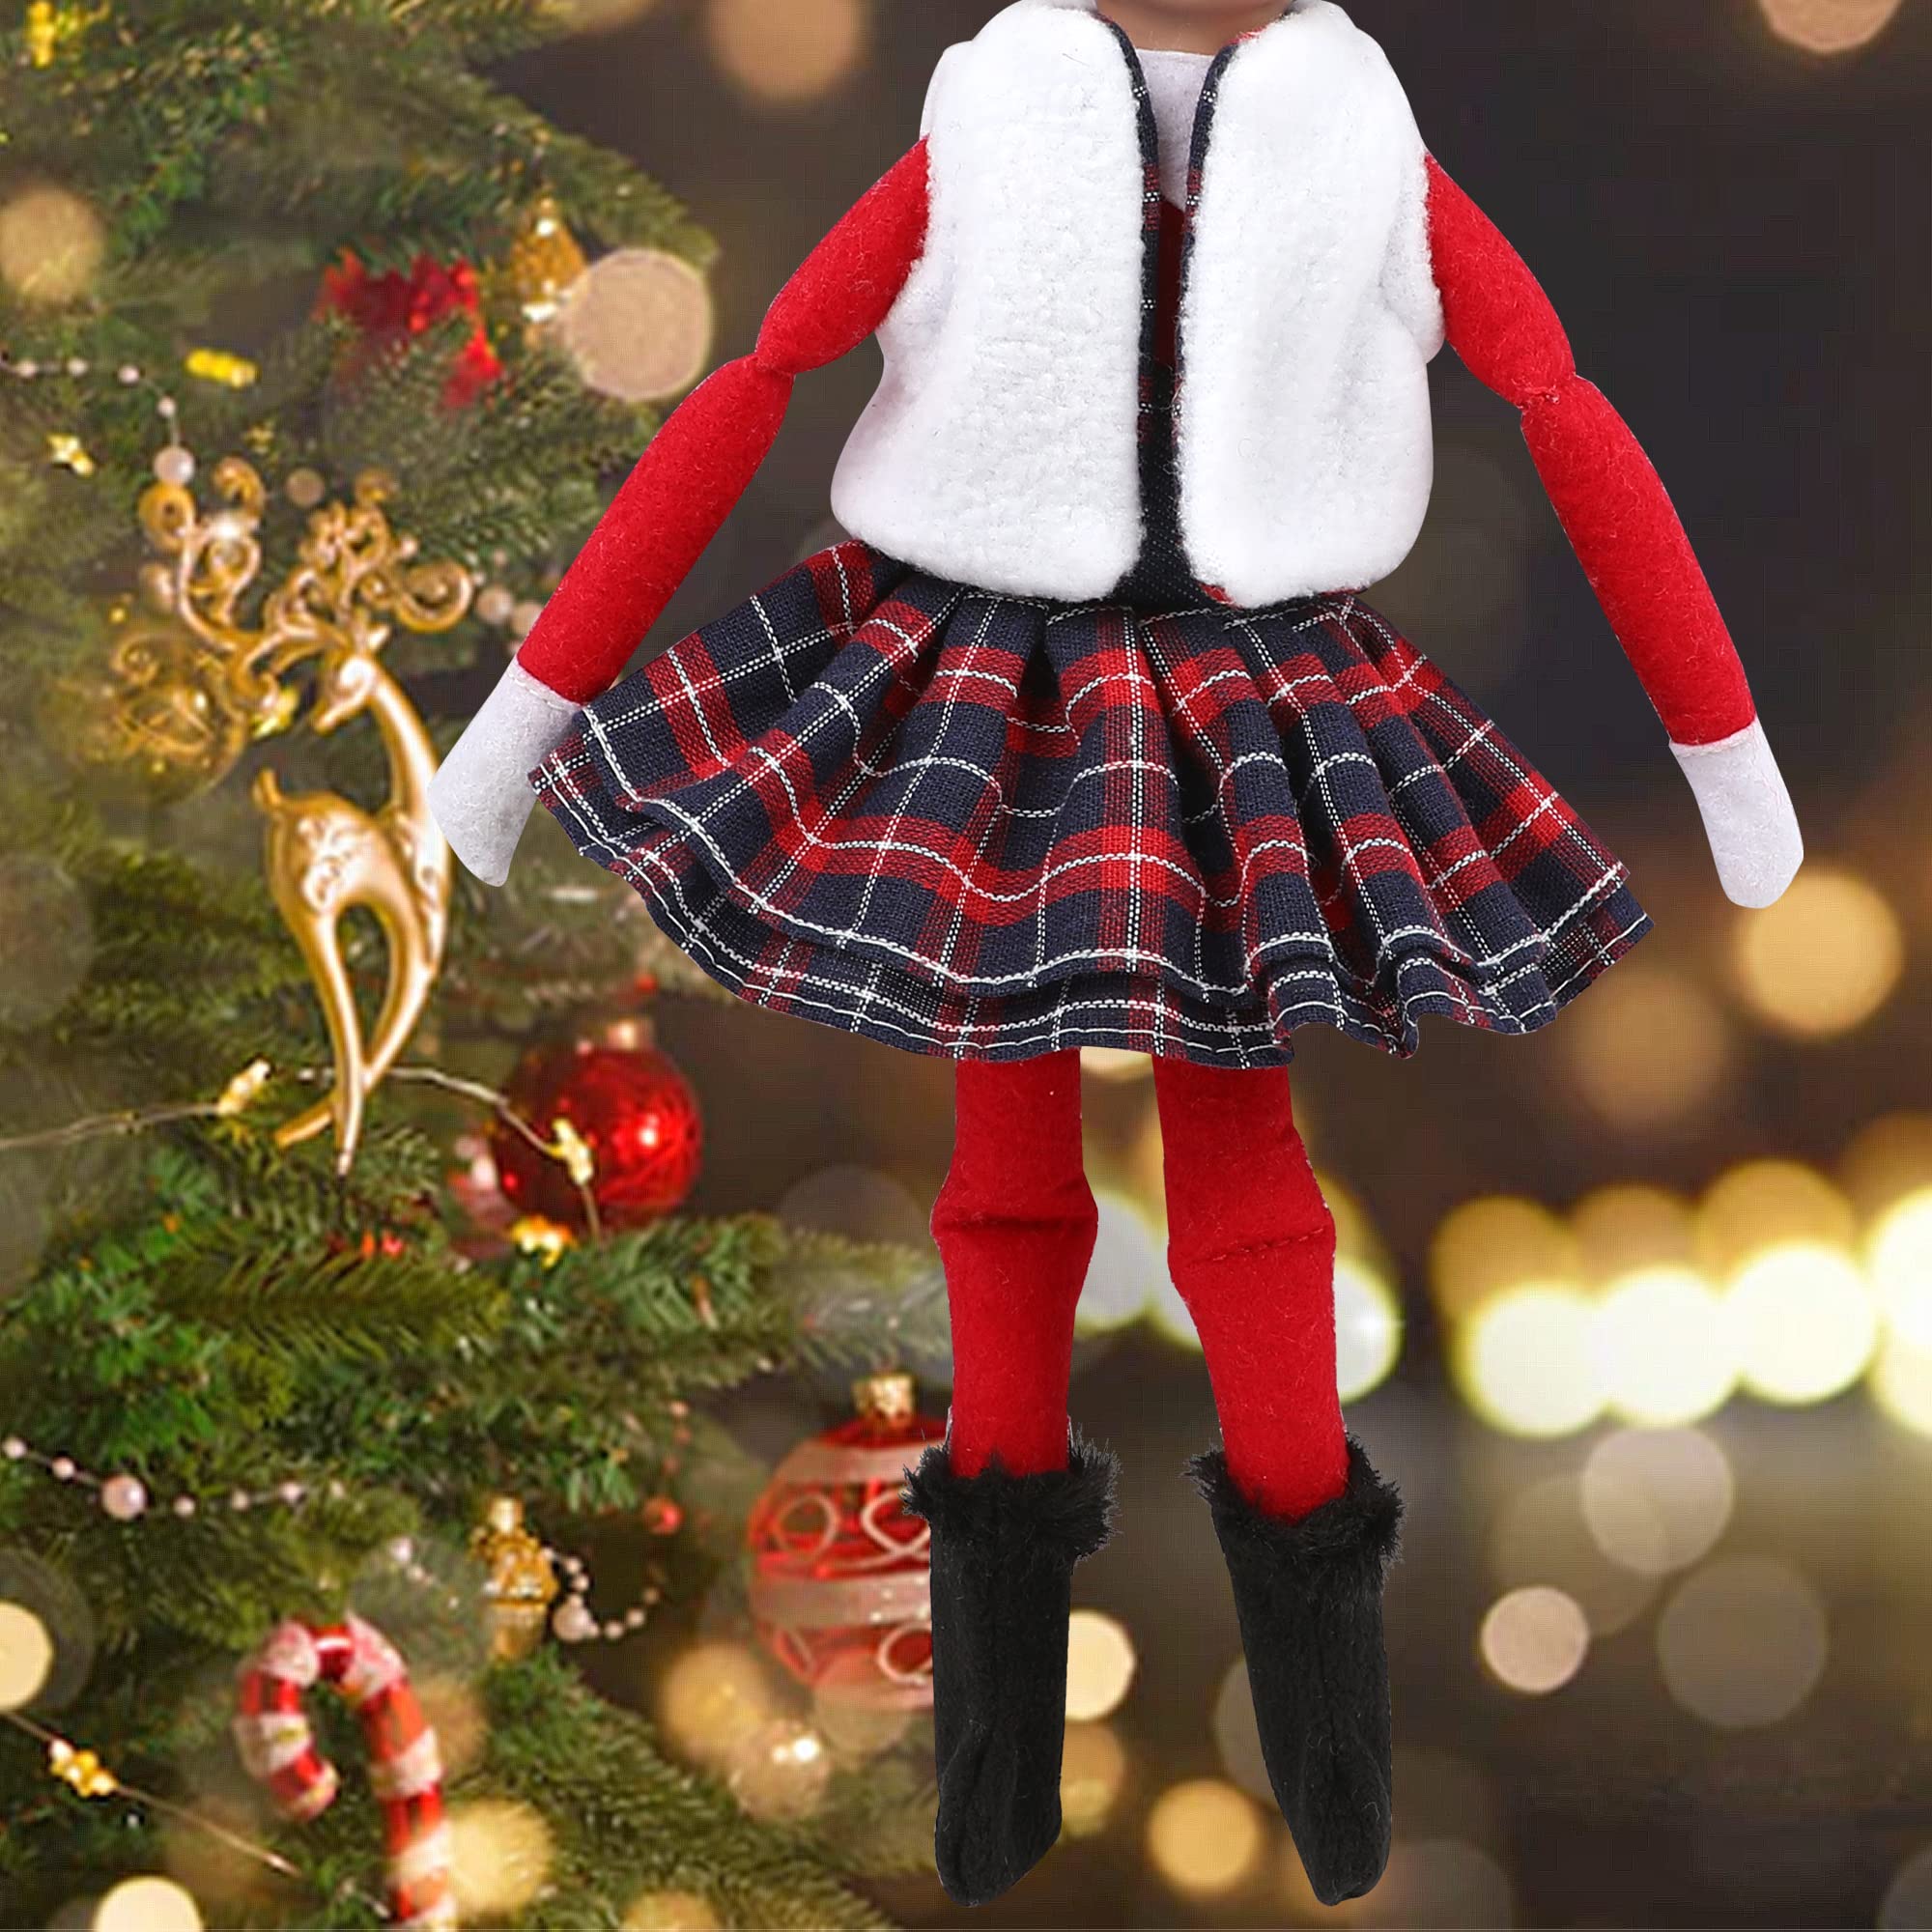 Christmas Elf Doll Accessories Costume Accessories Set Christmas Doll Clothing Couture Accessories for Elf Doll Including Sleeping Bag, Fluffy Vest, Skirt, T-Shirt, Boots